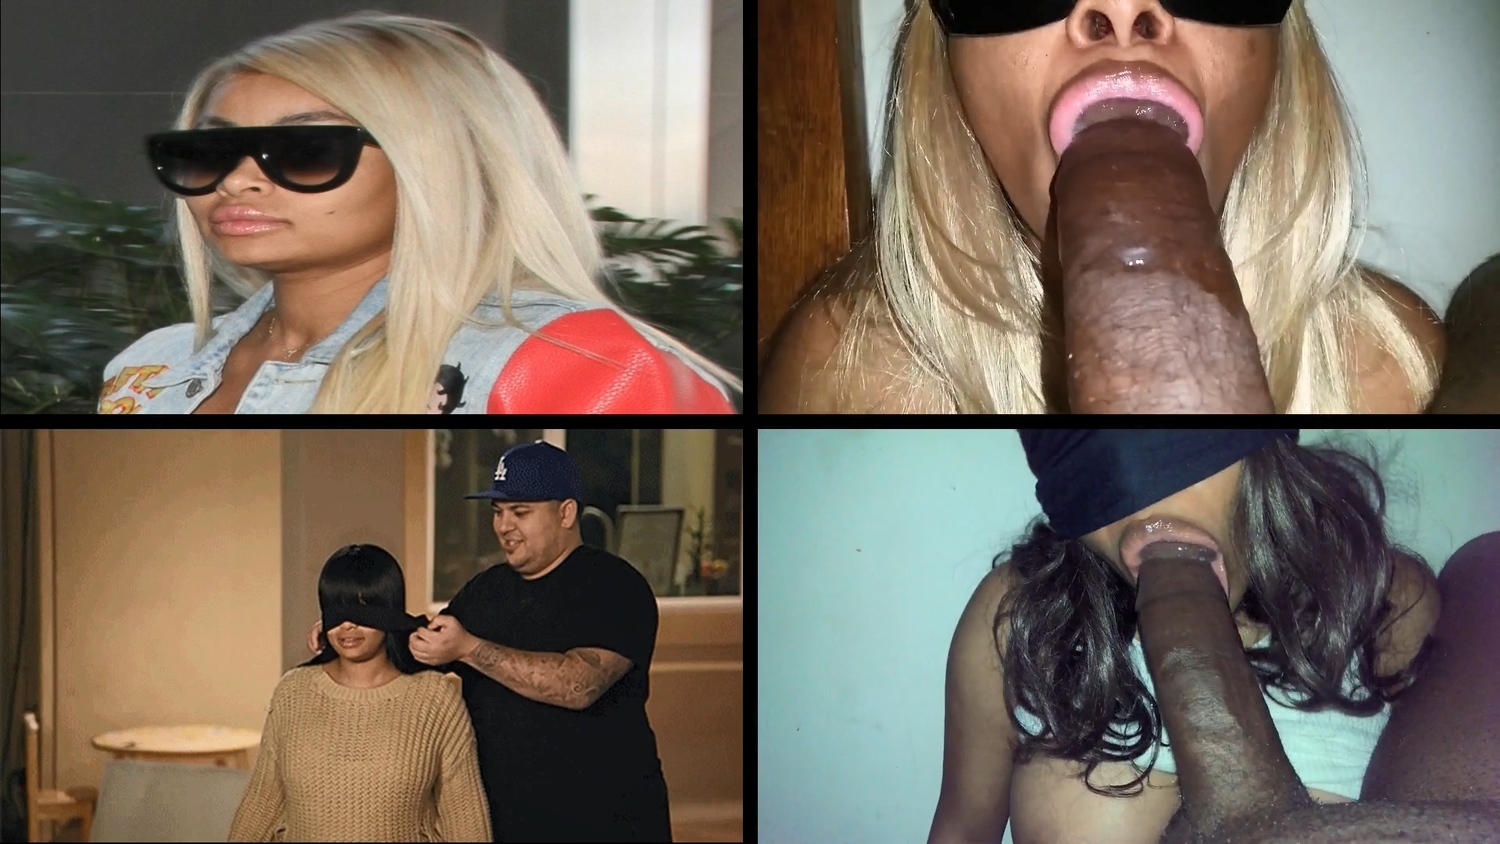 Black Chyna Sucking Dick - Free Sex Pics, Hot Porn Images and Best XXX Phot...